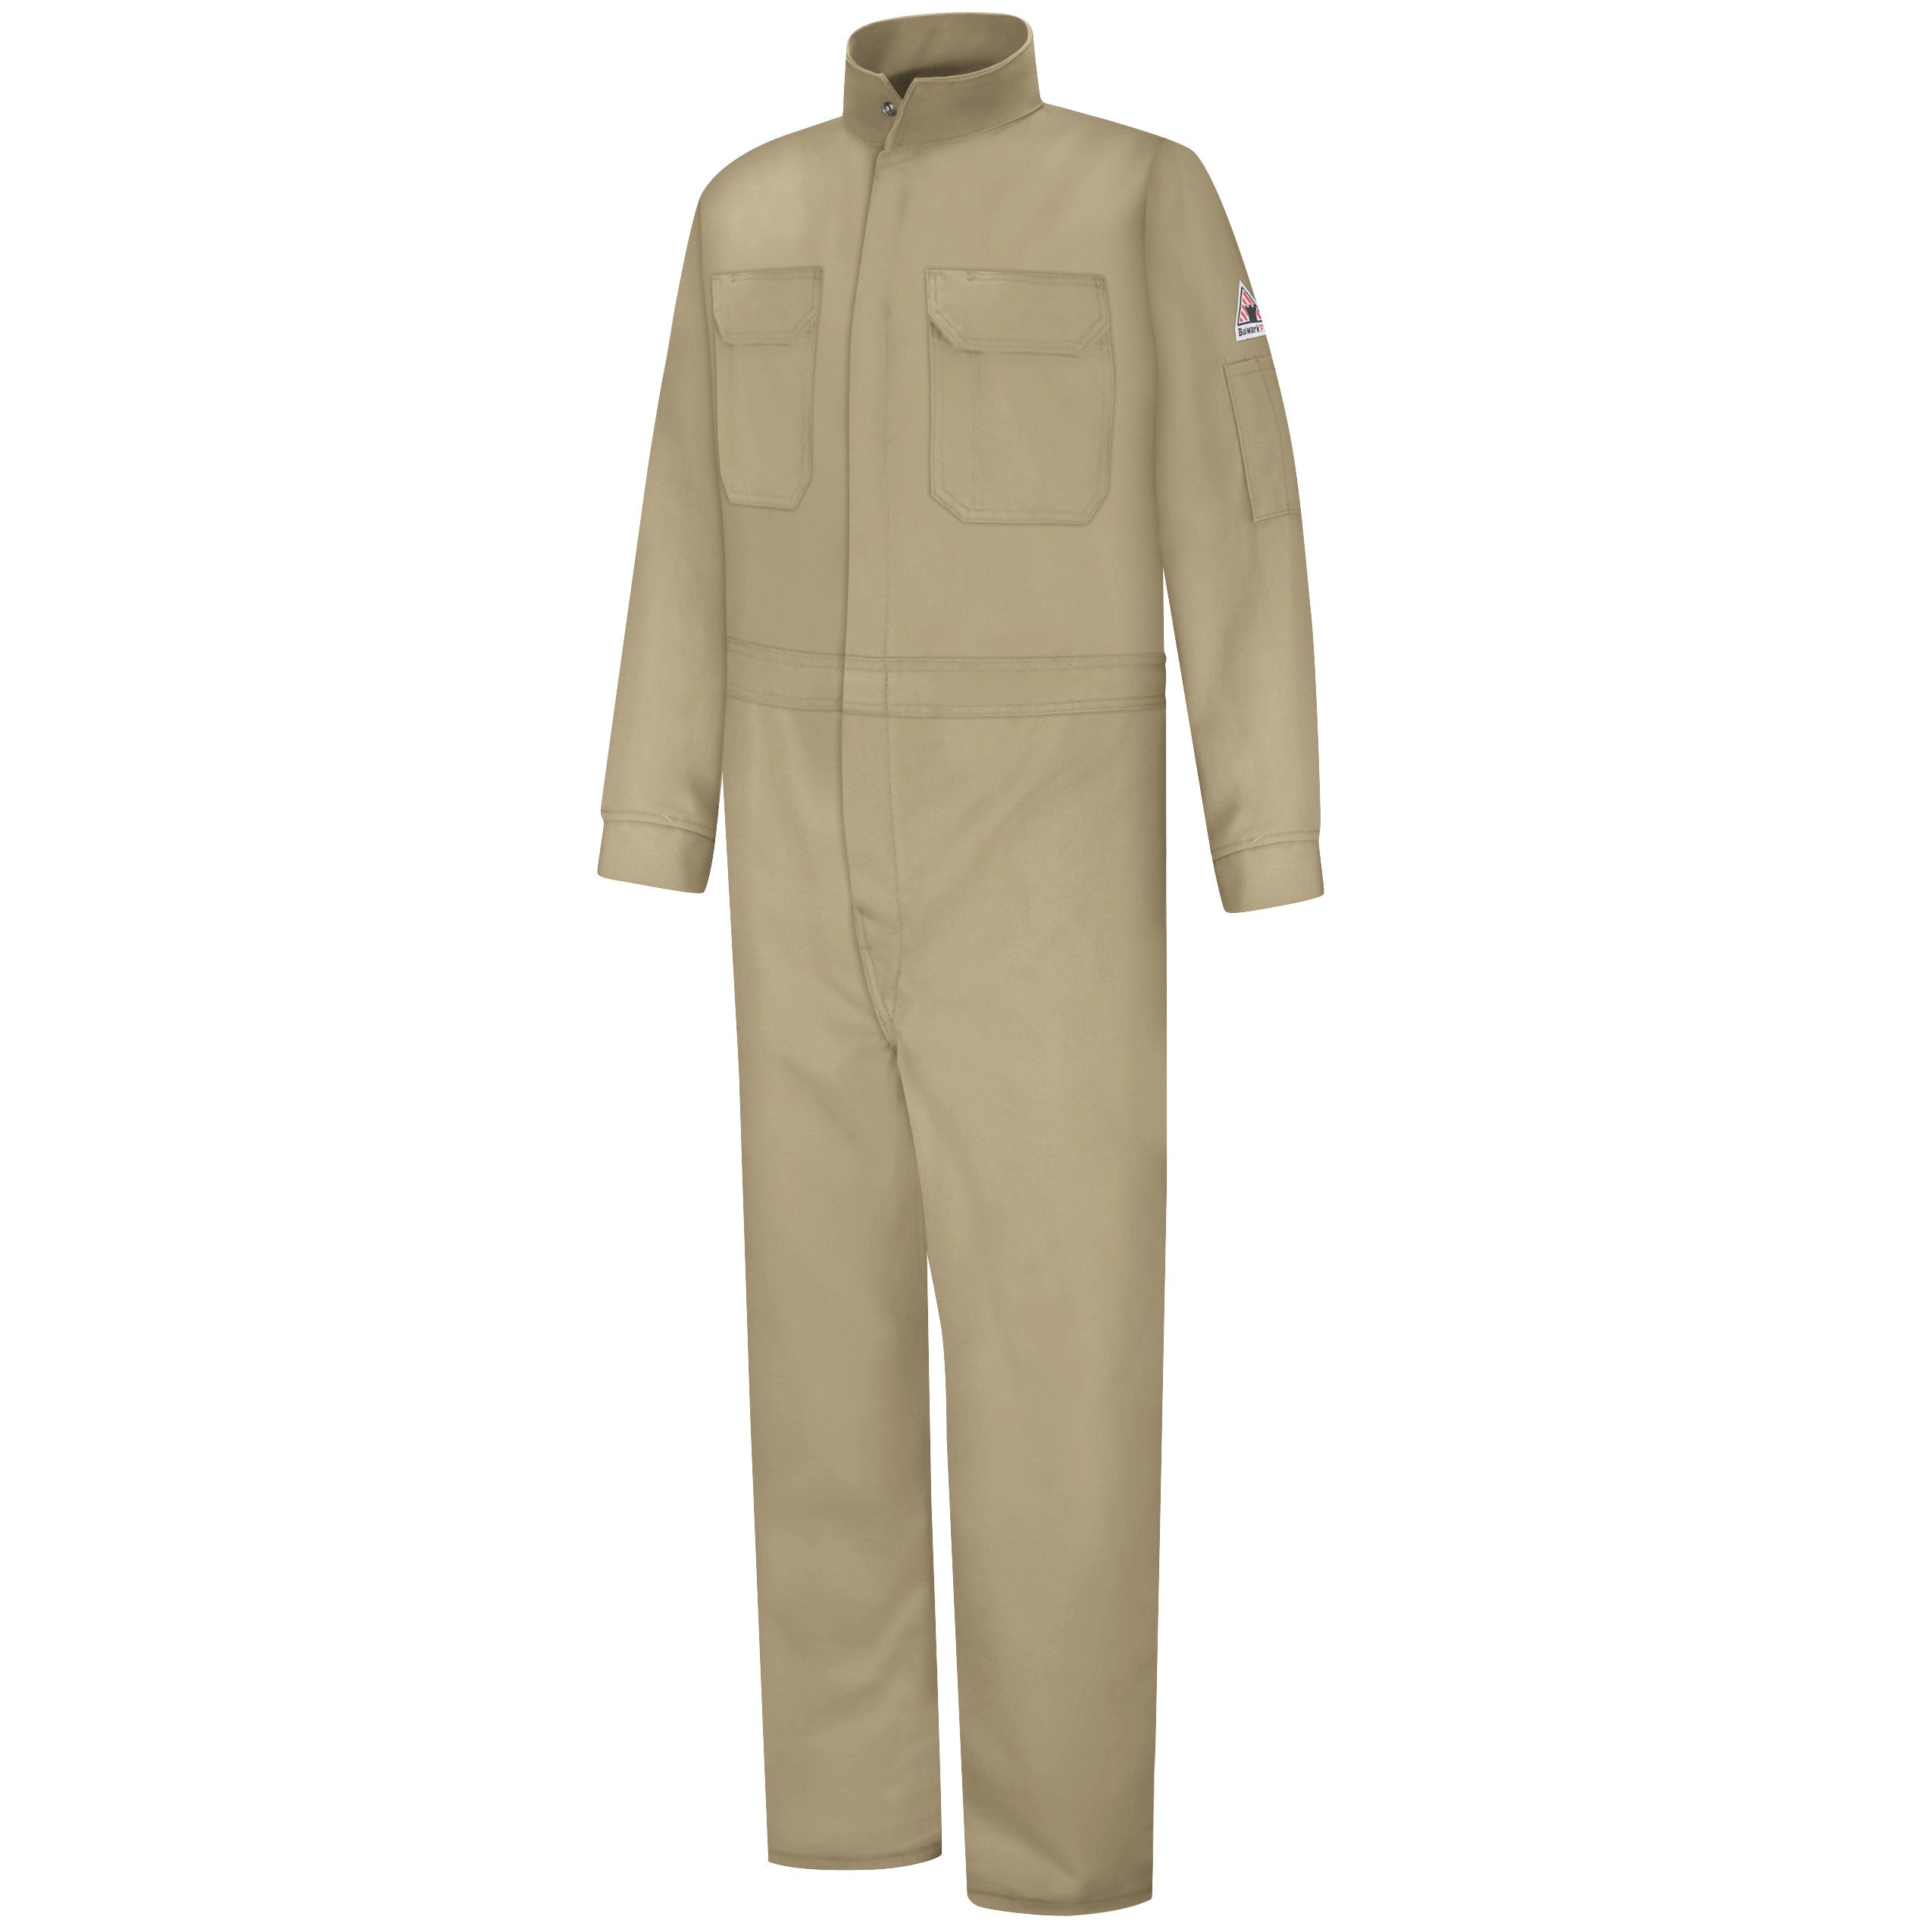 Women's Midweight Excel FR® ComforTouch® Premium Coverall CLB7 - Khaki-eSafety Supplies, Inc